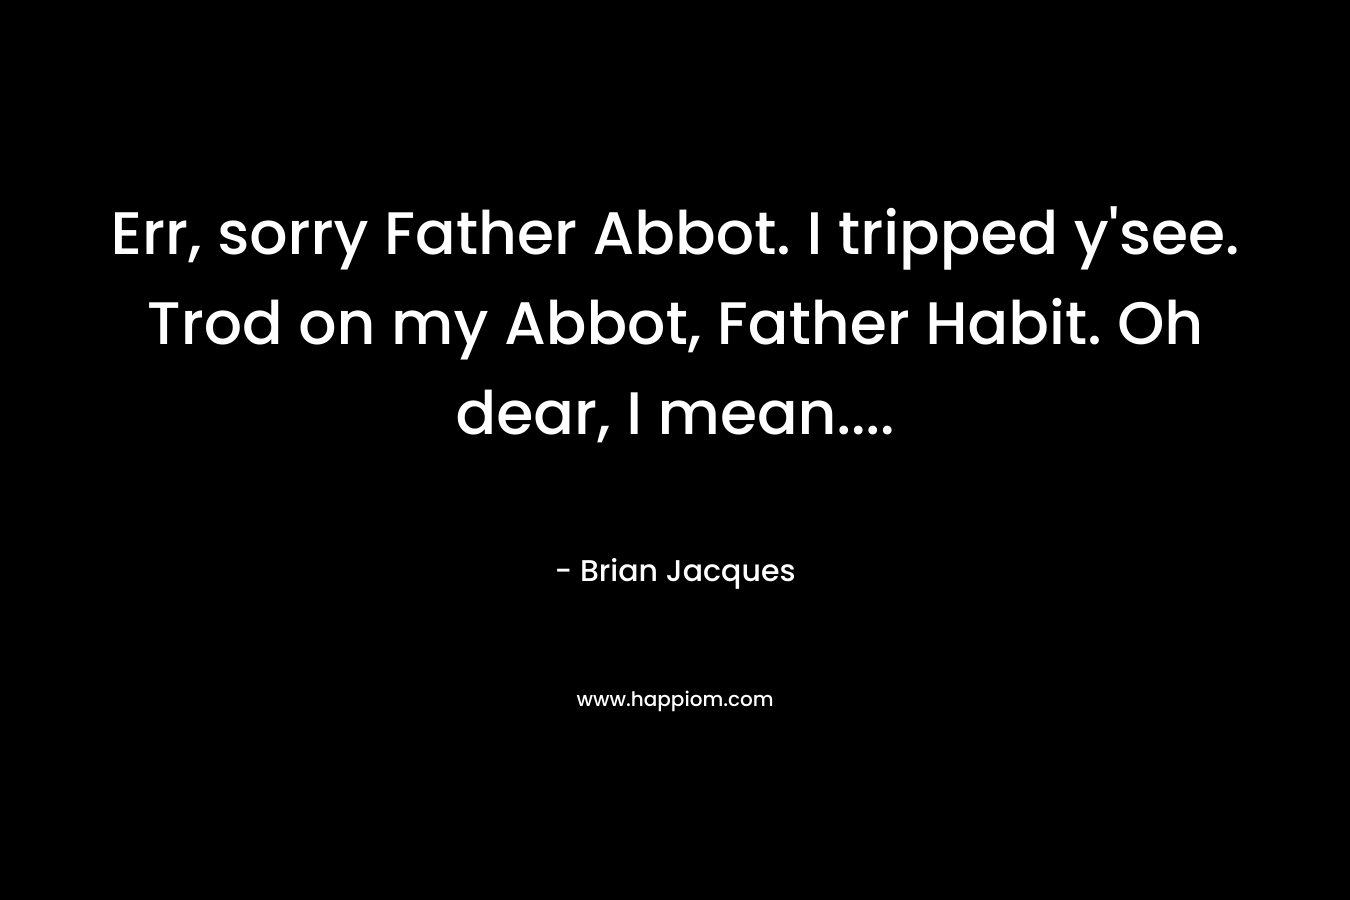 Err, sorry Father Abbot. I tripped y'see. Trod on my Abbot, Father Habit. Oh dear, I mean....